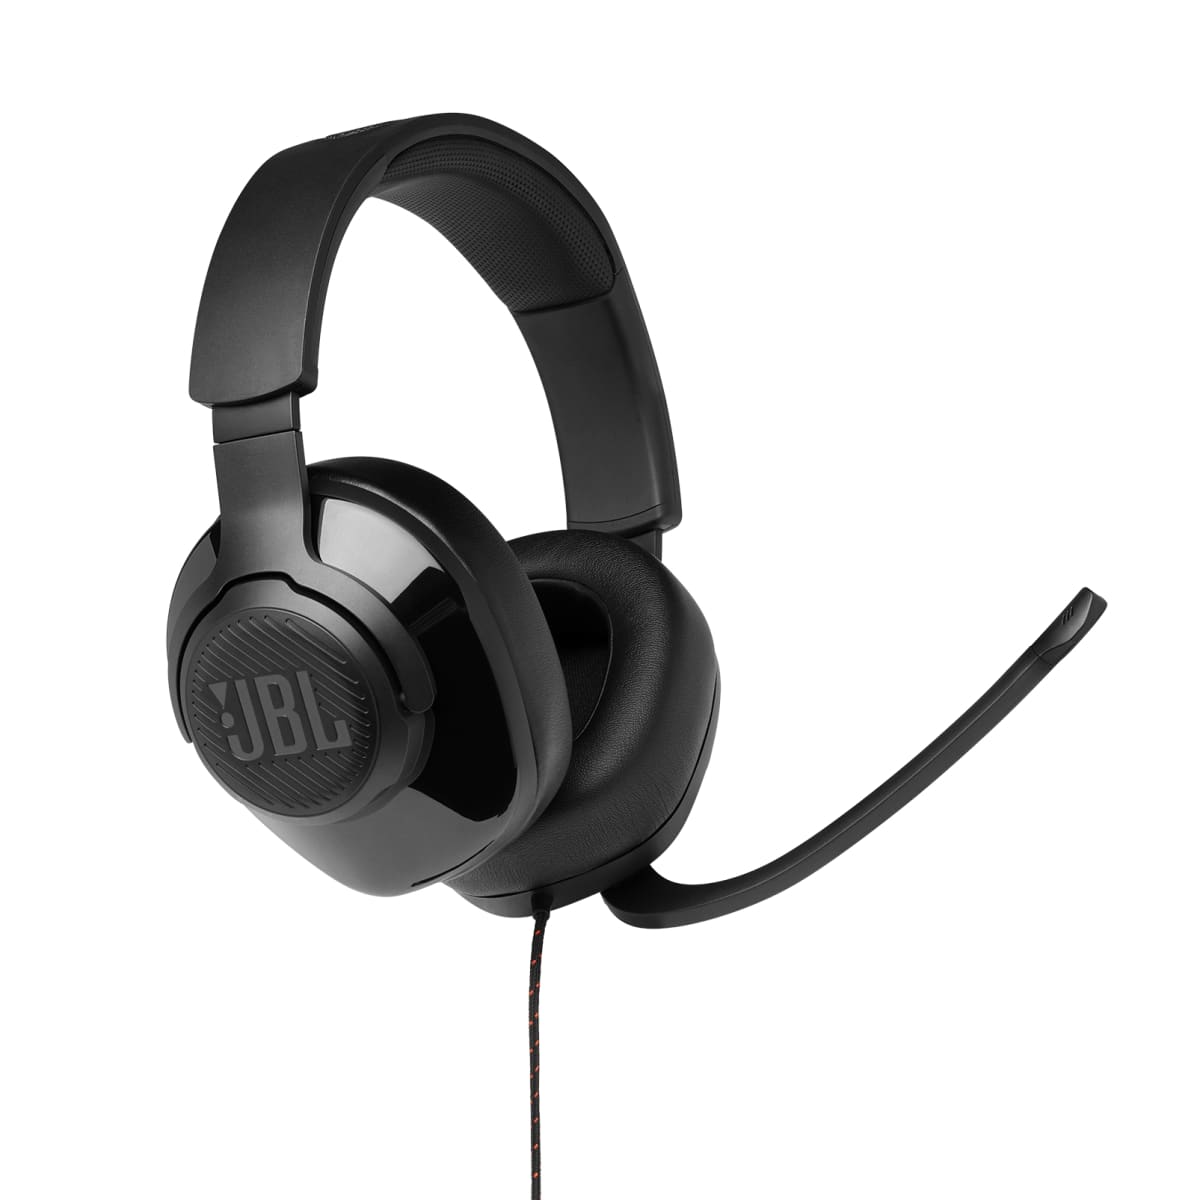 JBL Quantum 300 Hybrid wired over-ear gaming headset with 